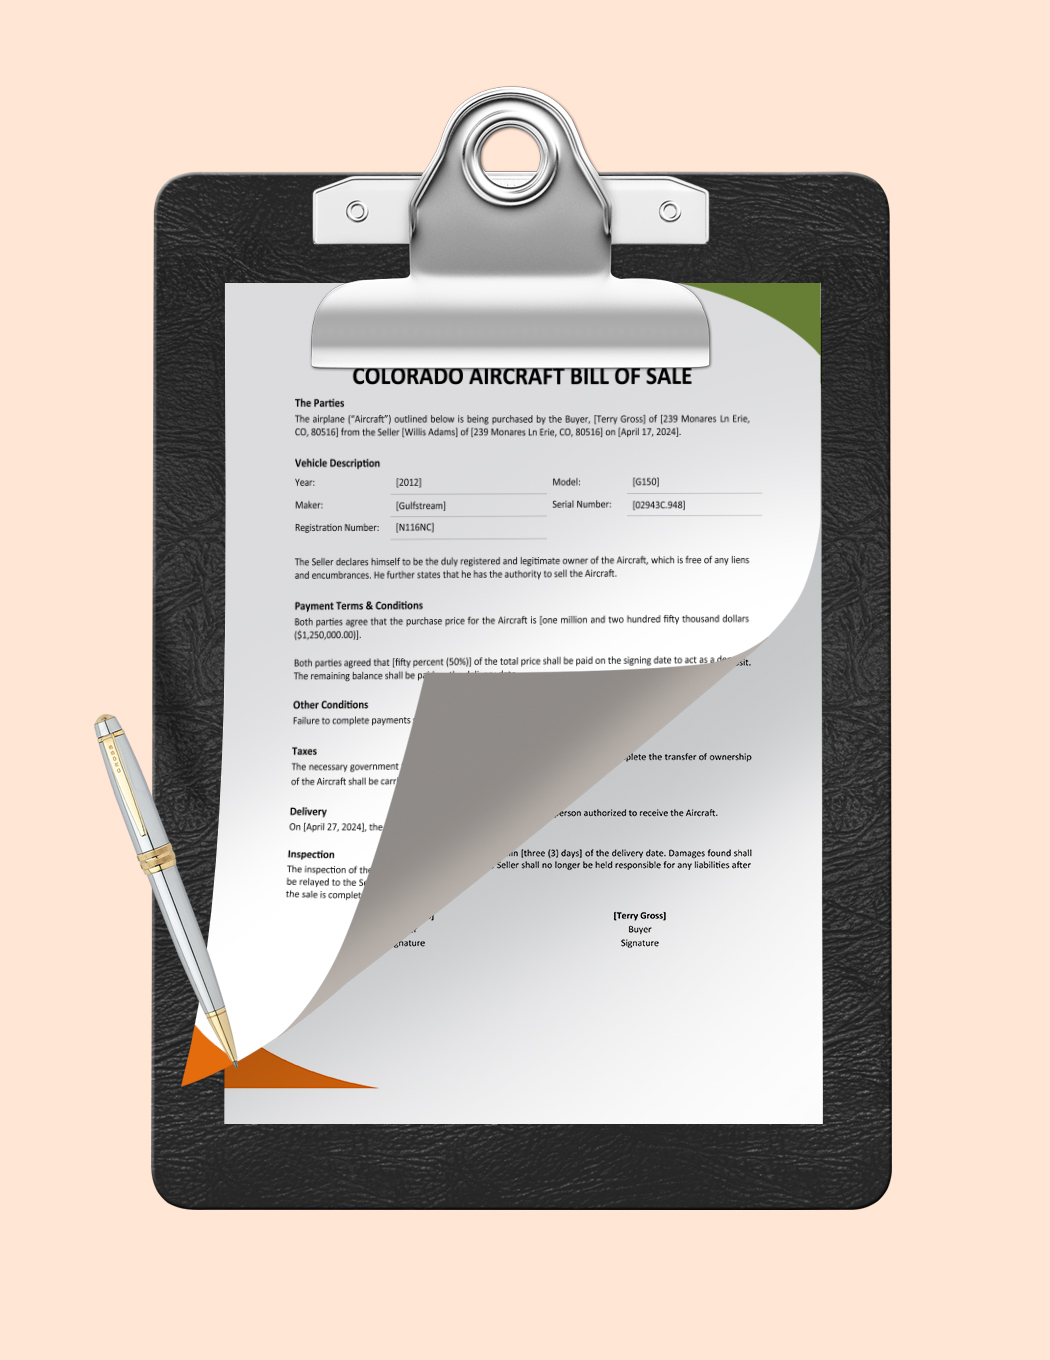 Colorado Aircraft / Airplane Bill Of Sale Template